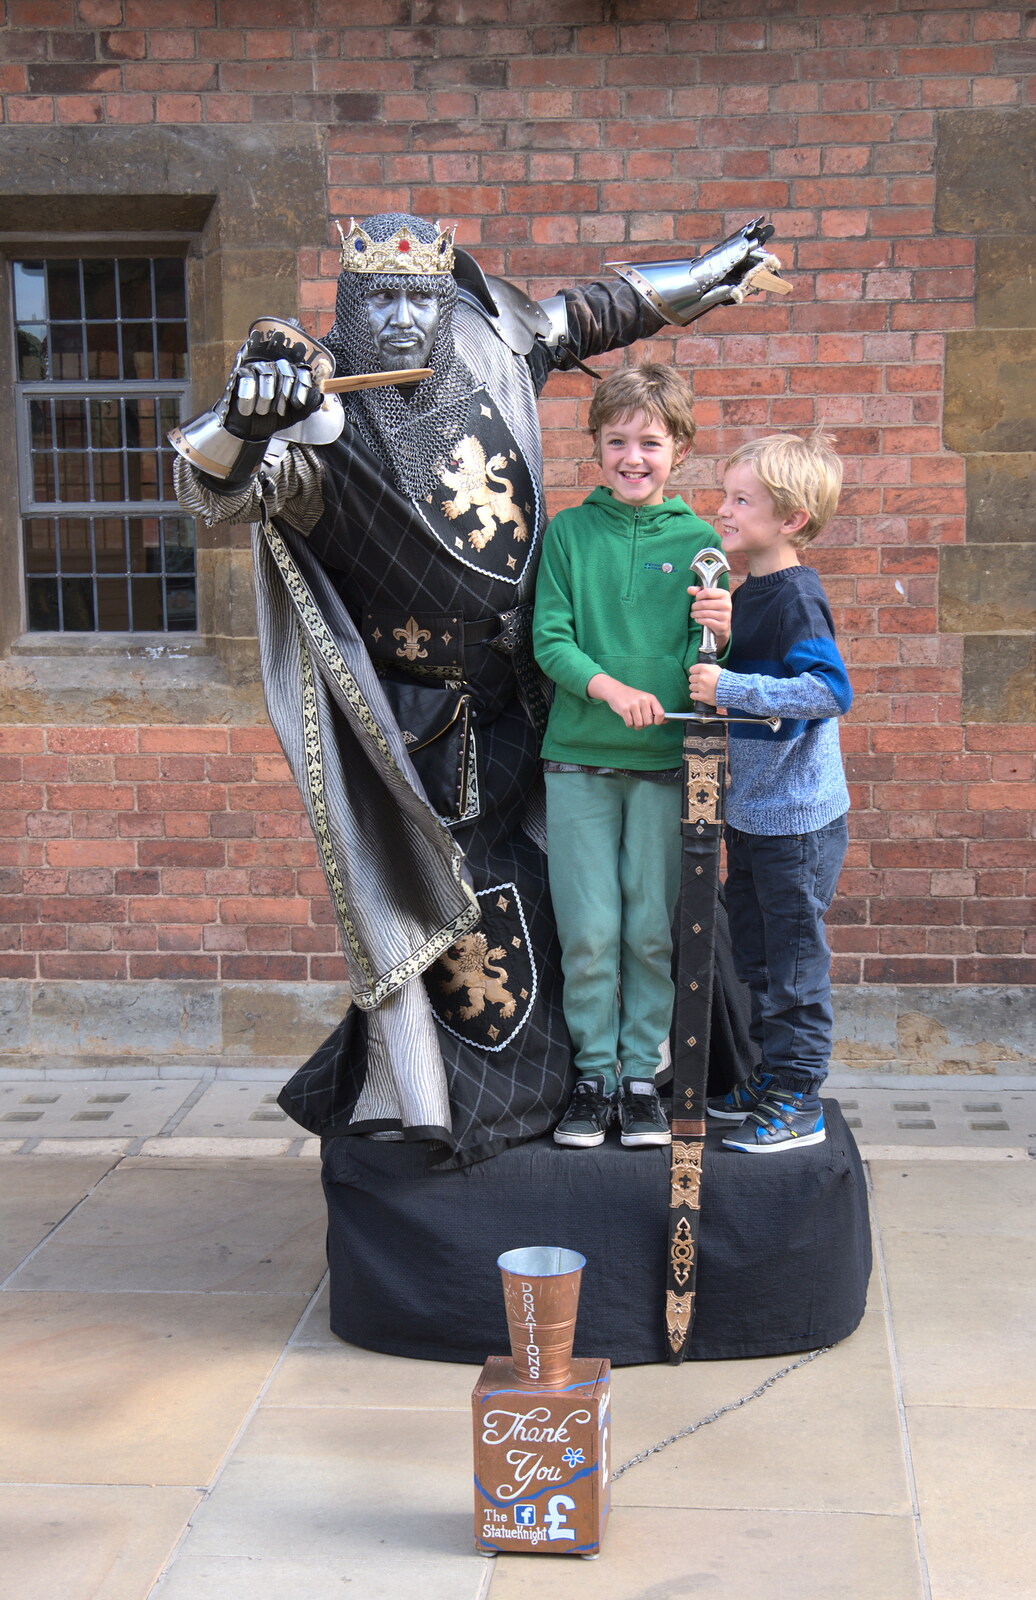 Fred, Harry and the Silver Knight of Straford from A Postcard from Stratford-upon-Avon, Warwickshire - 9th September 2018